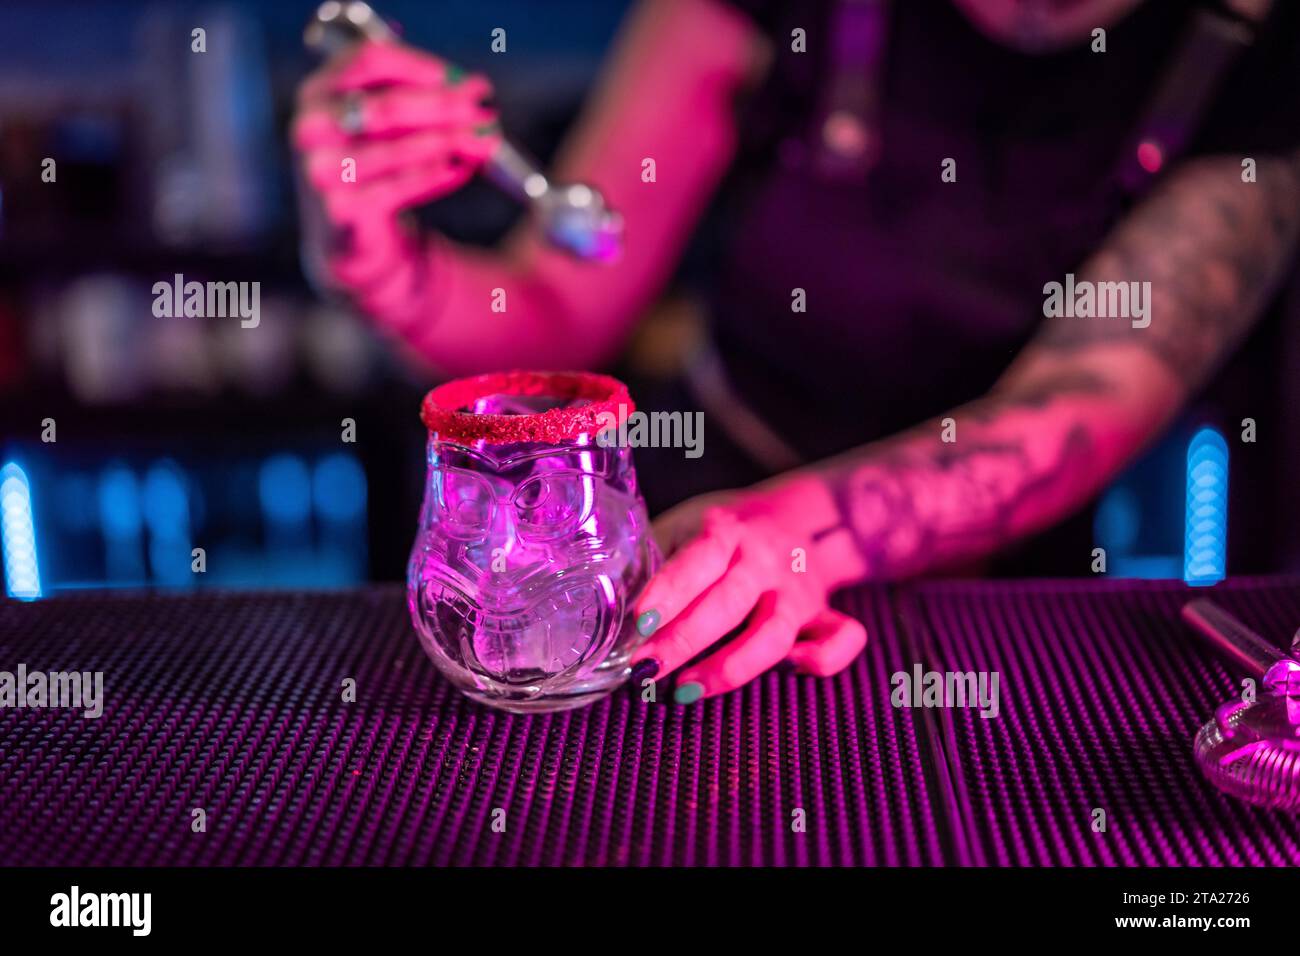 Close-up of a bartender preparing a margarita cocktail adding ice in the counter of a bar with neon lights Stock Photo